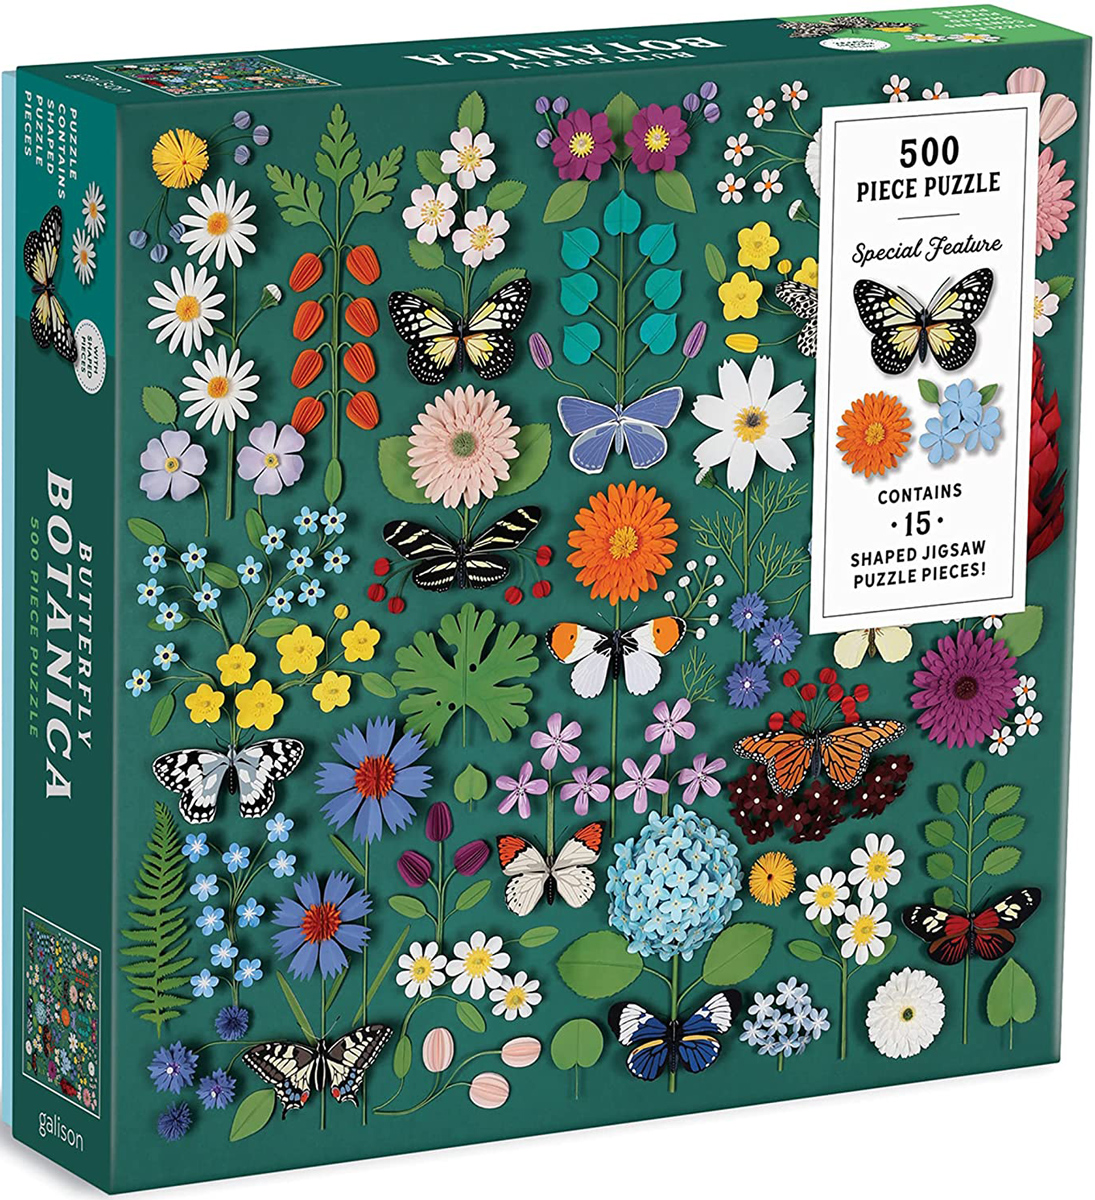 Butterfly Botanica with Shaped Pieces